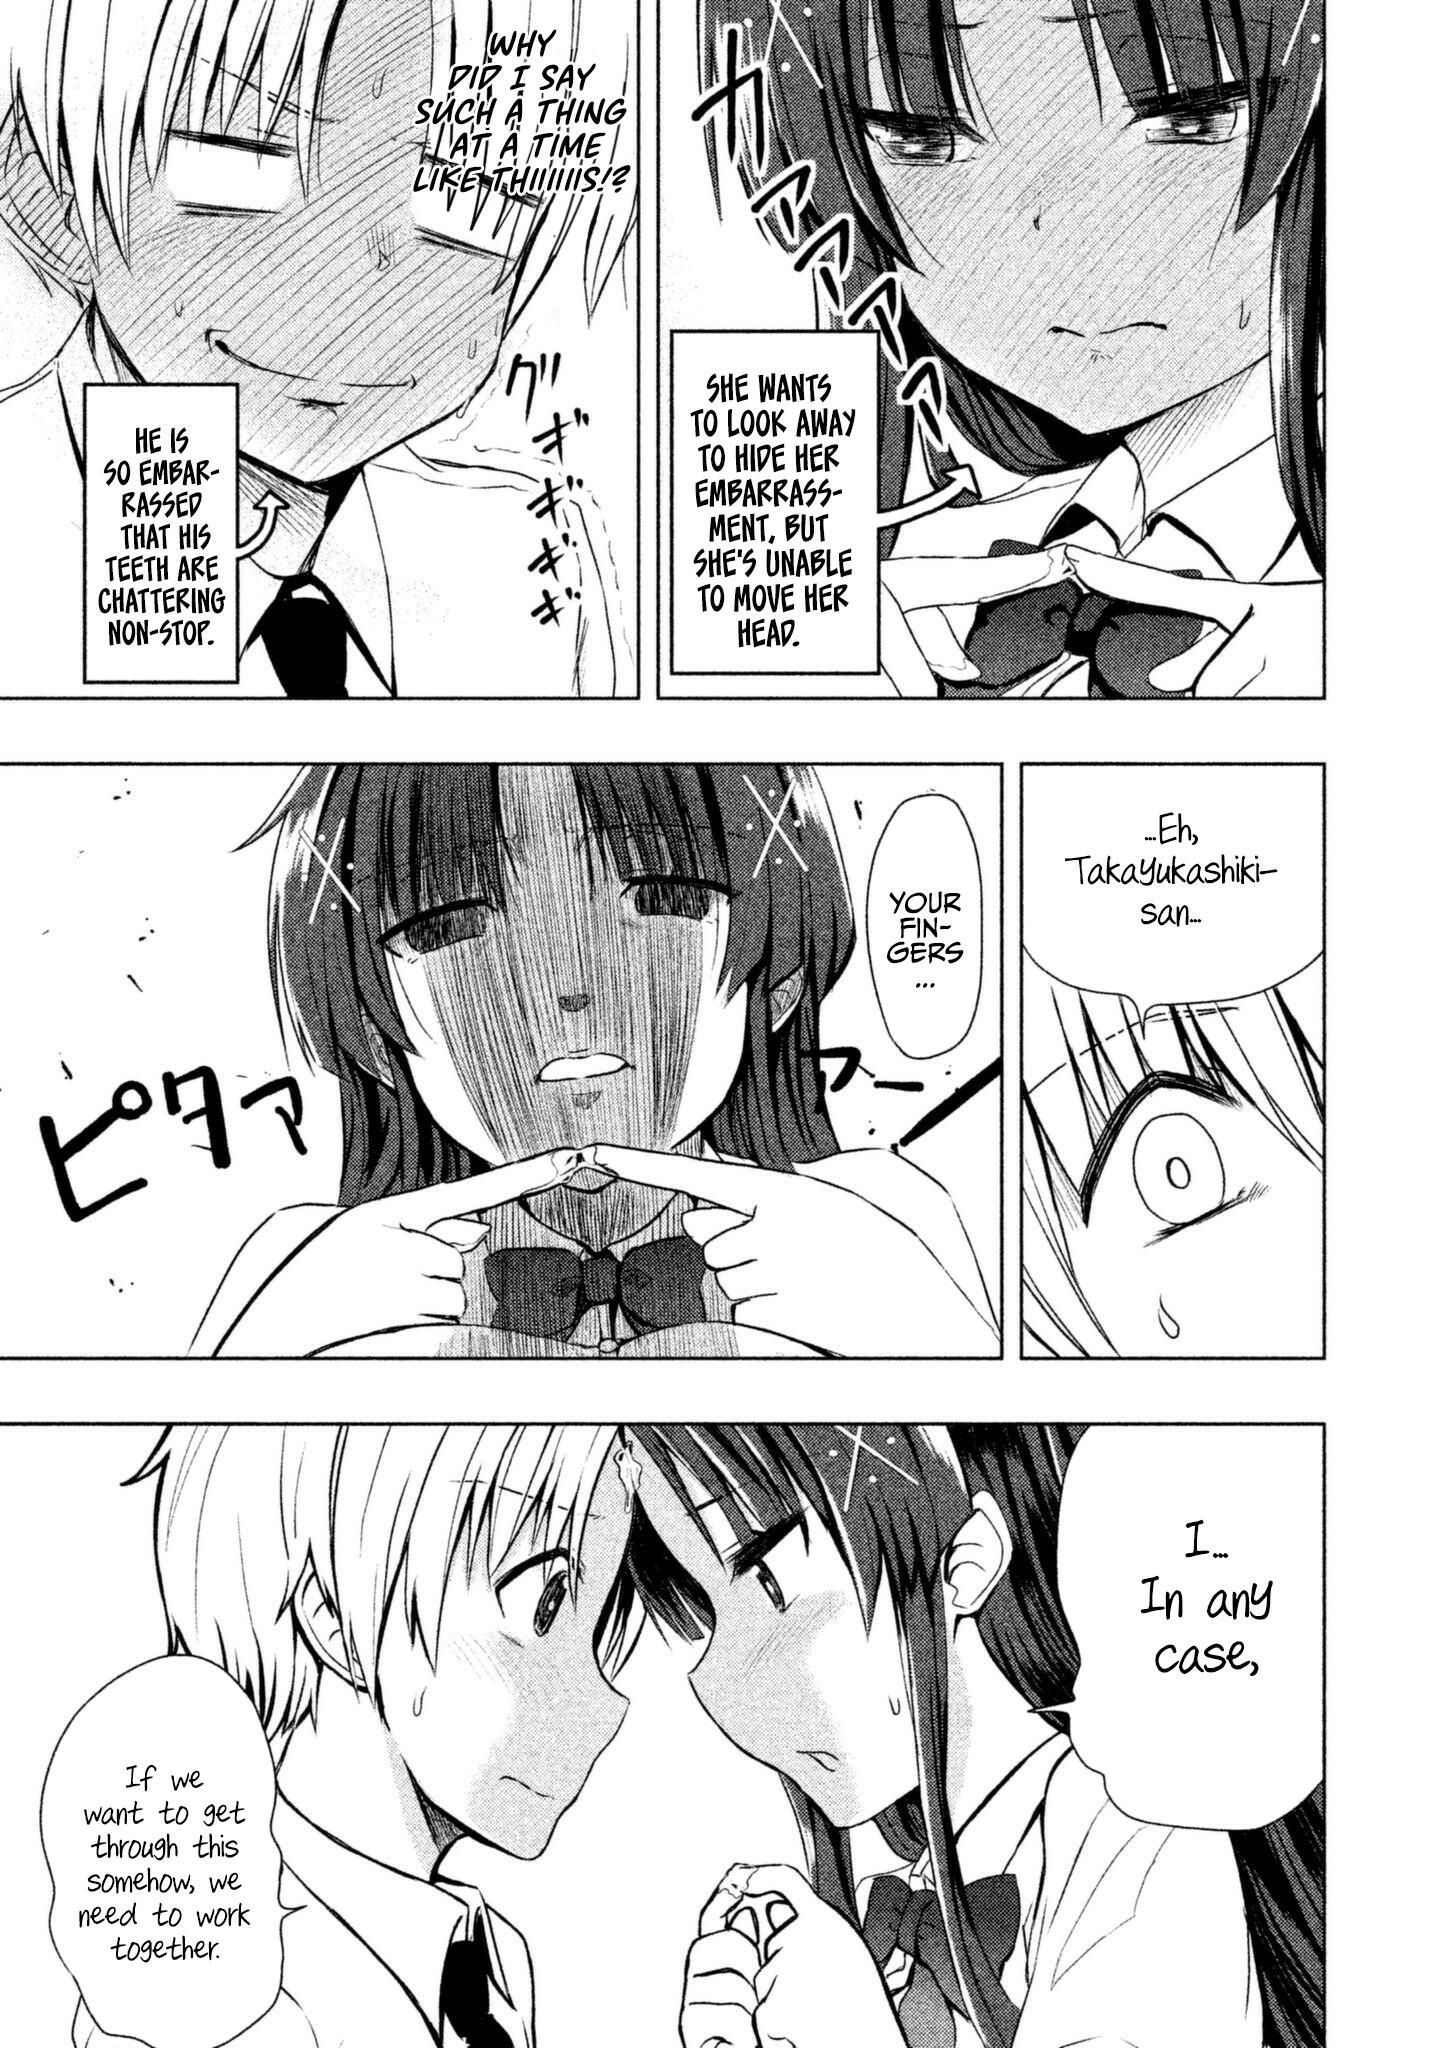 A Girl Who Is Very Well-Informed About Weird Knowledge, Takayukashiki Souko-San Chapter 16: Adhesive page 4 - Mangakakalots.com